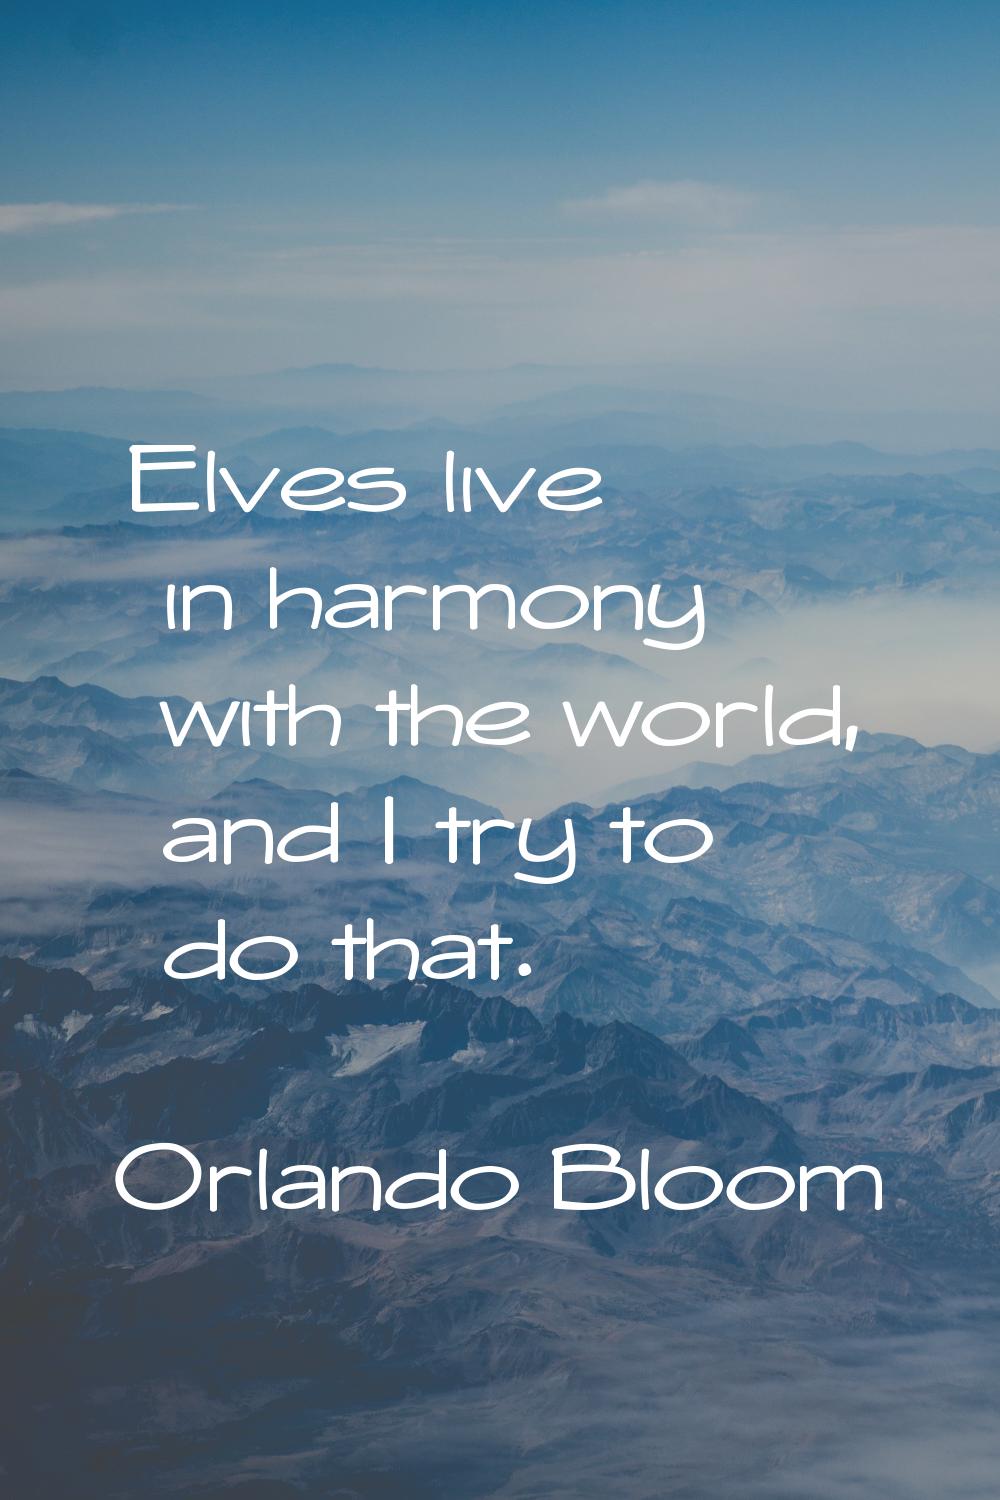 Elves live in harmony with the world, and I try to do that.